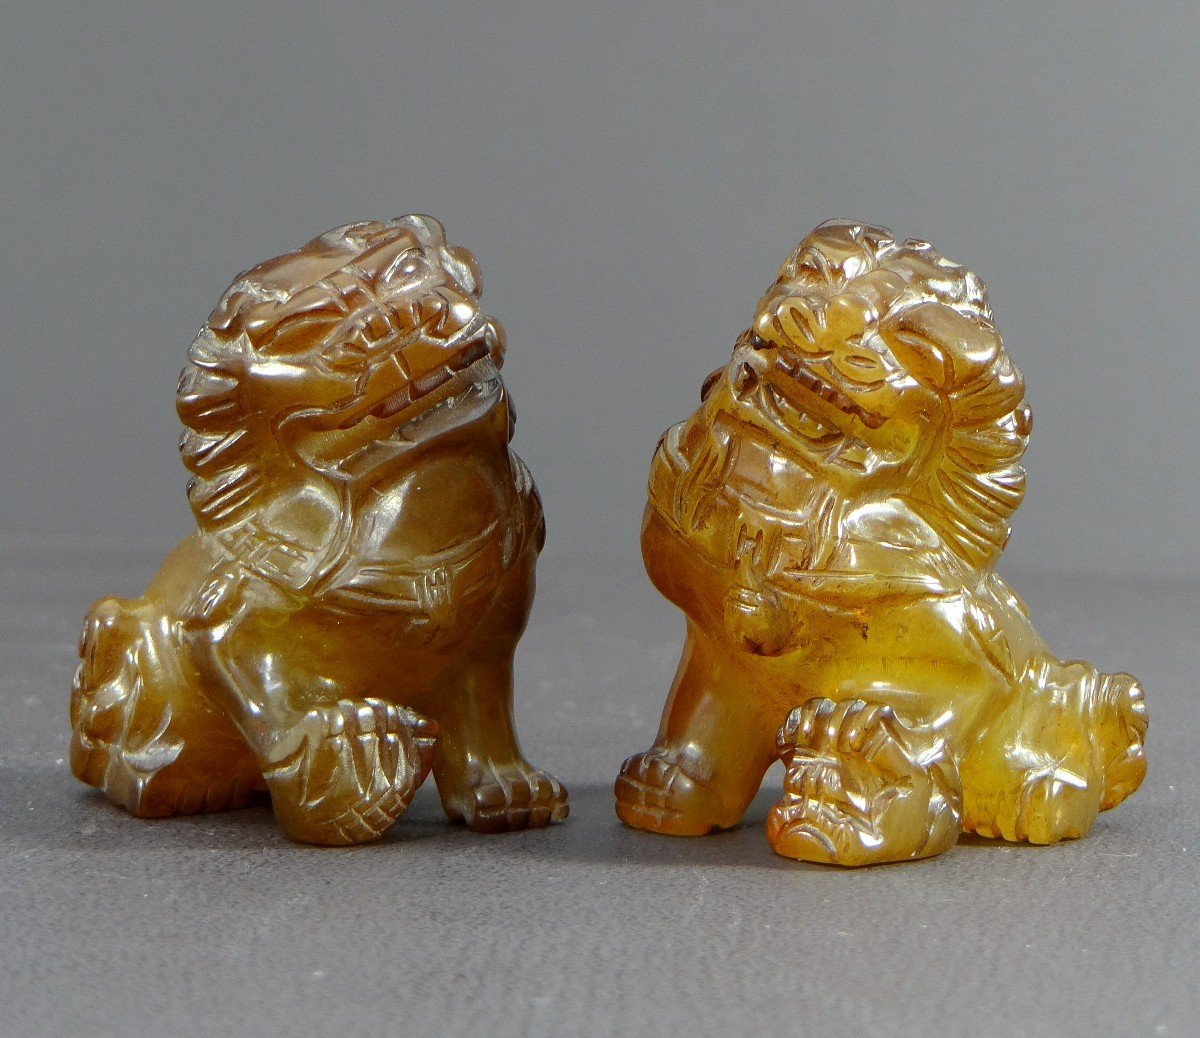 China, Mid-20th Century, Pair Of Fo Dogs In Hard Stone In The Spirit Of Agate.